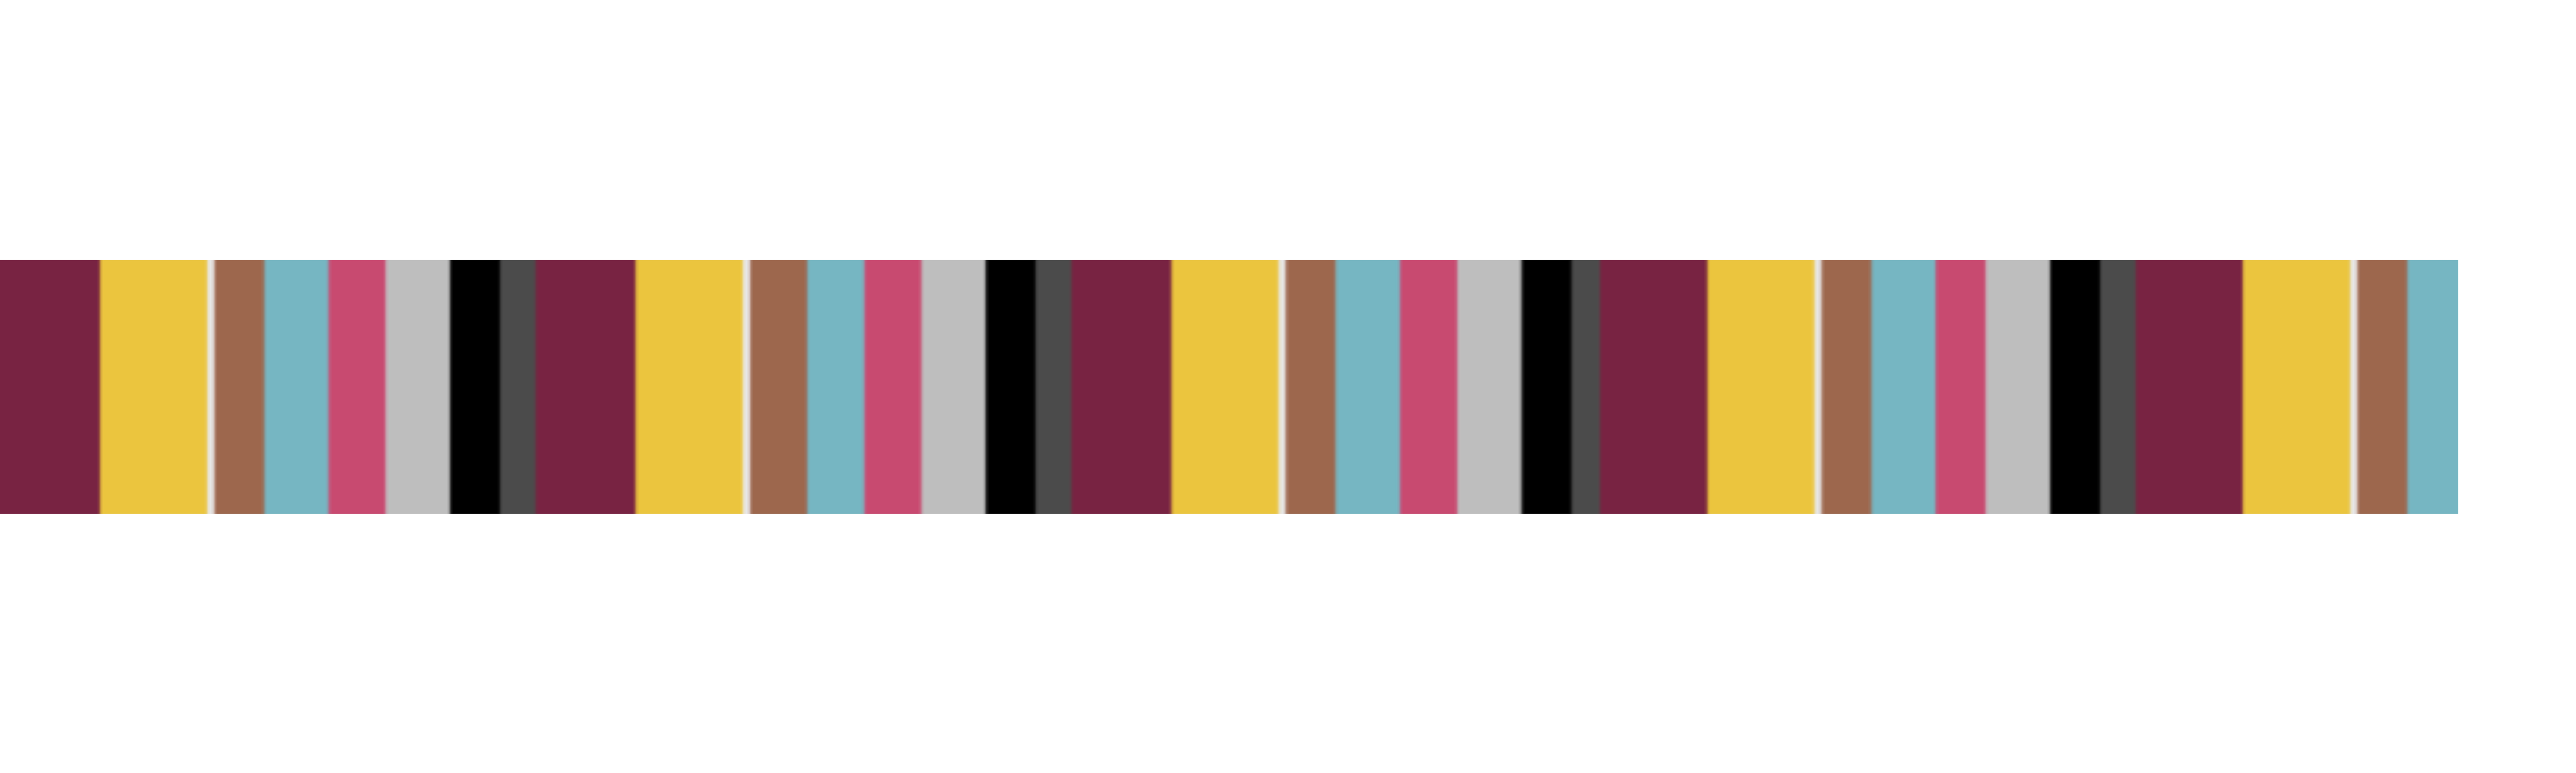 Prismatic Humanities Institute stripe with ASU Maroon, Gold, Pink, Turquoise, Grey and Black arranged in dynamic bands